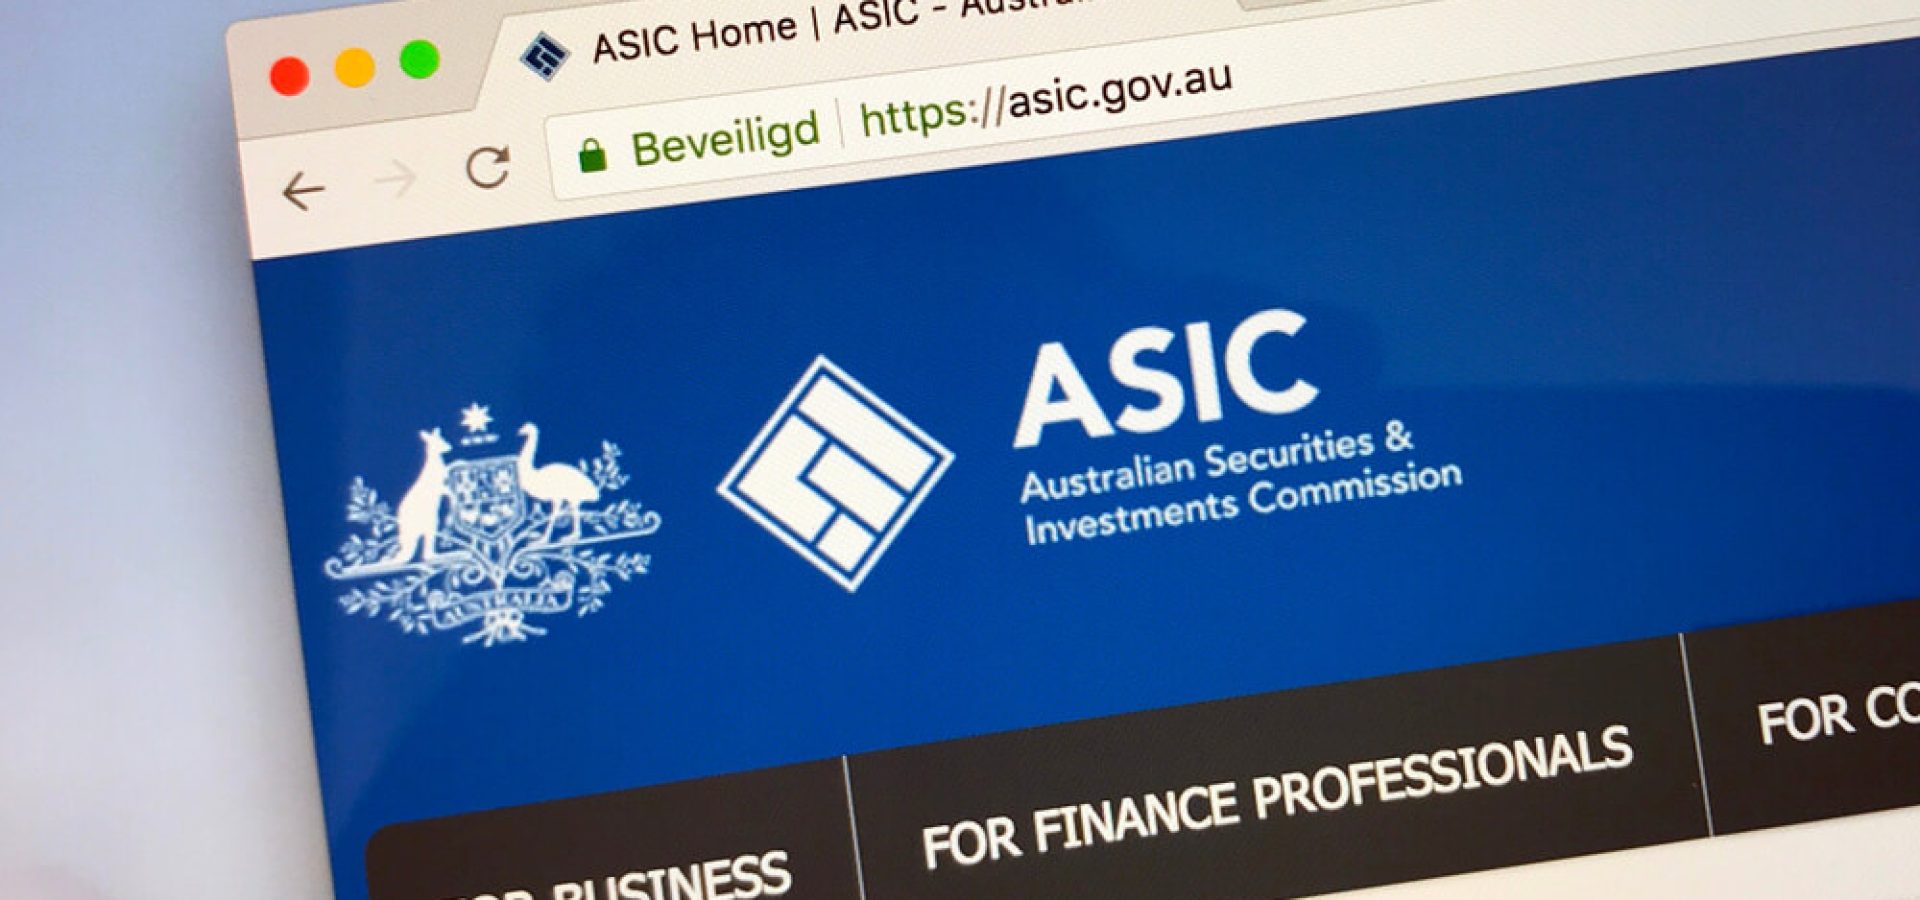 Website of The Australian Securities and Investments Commission